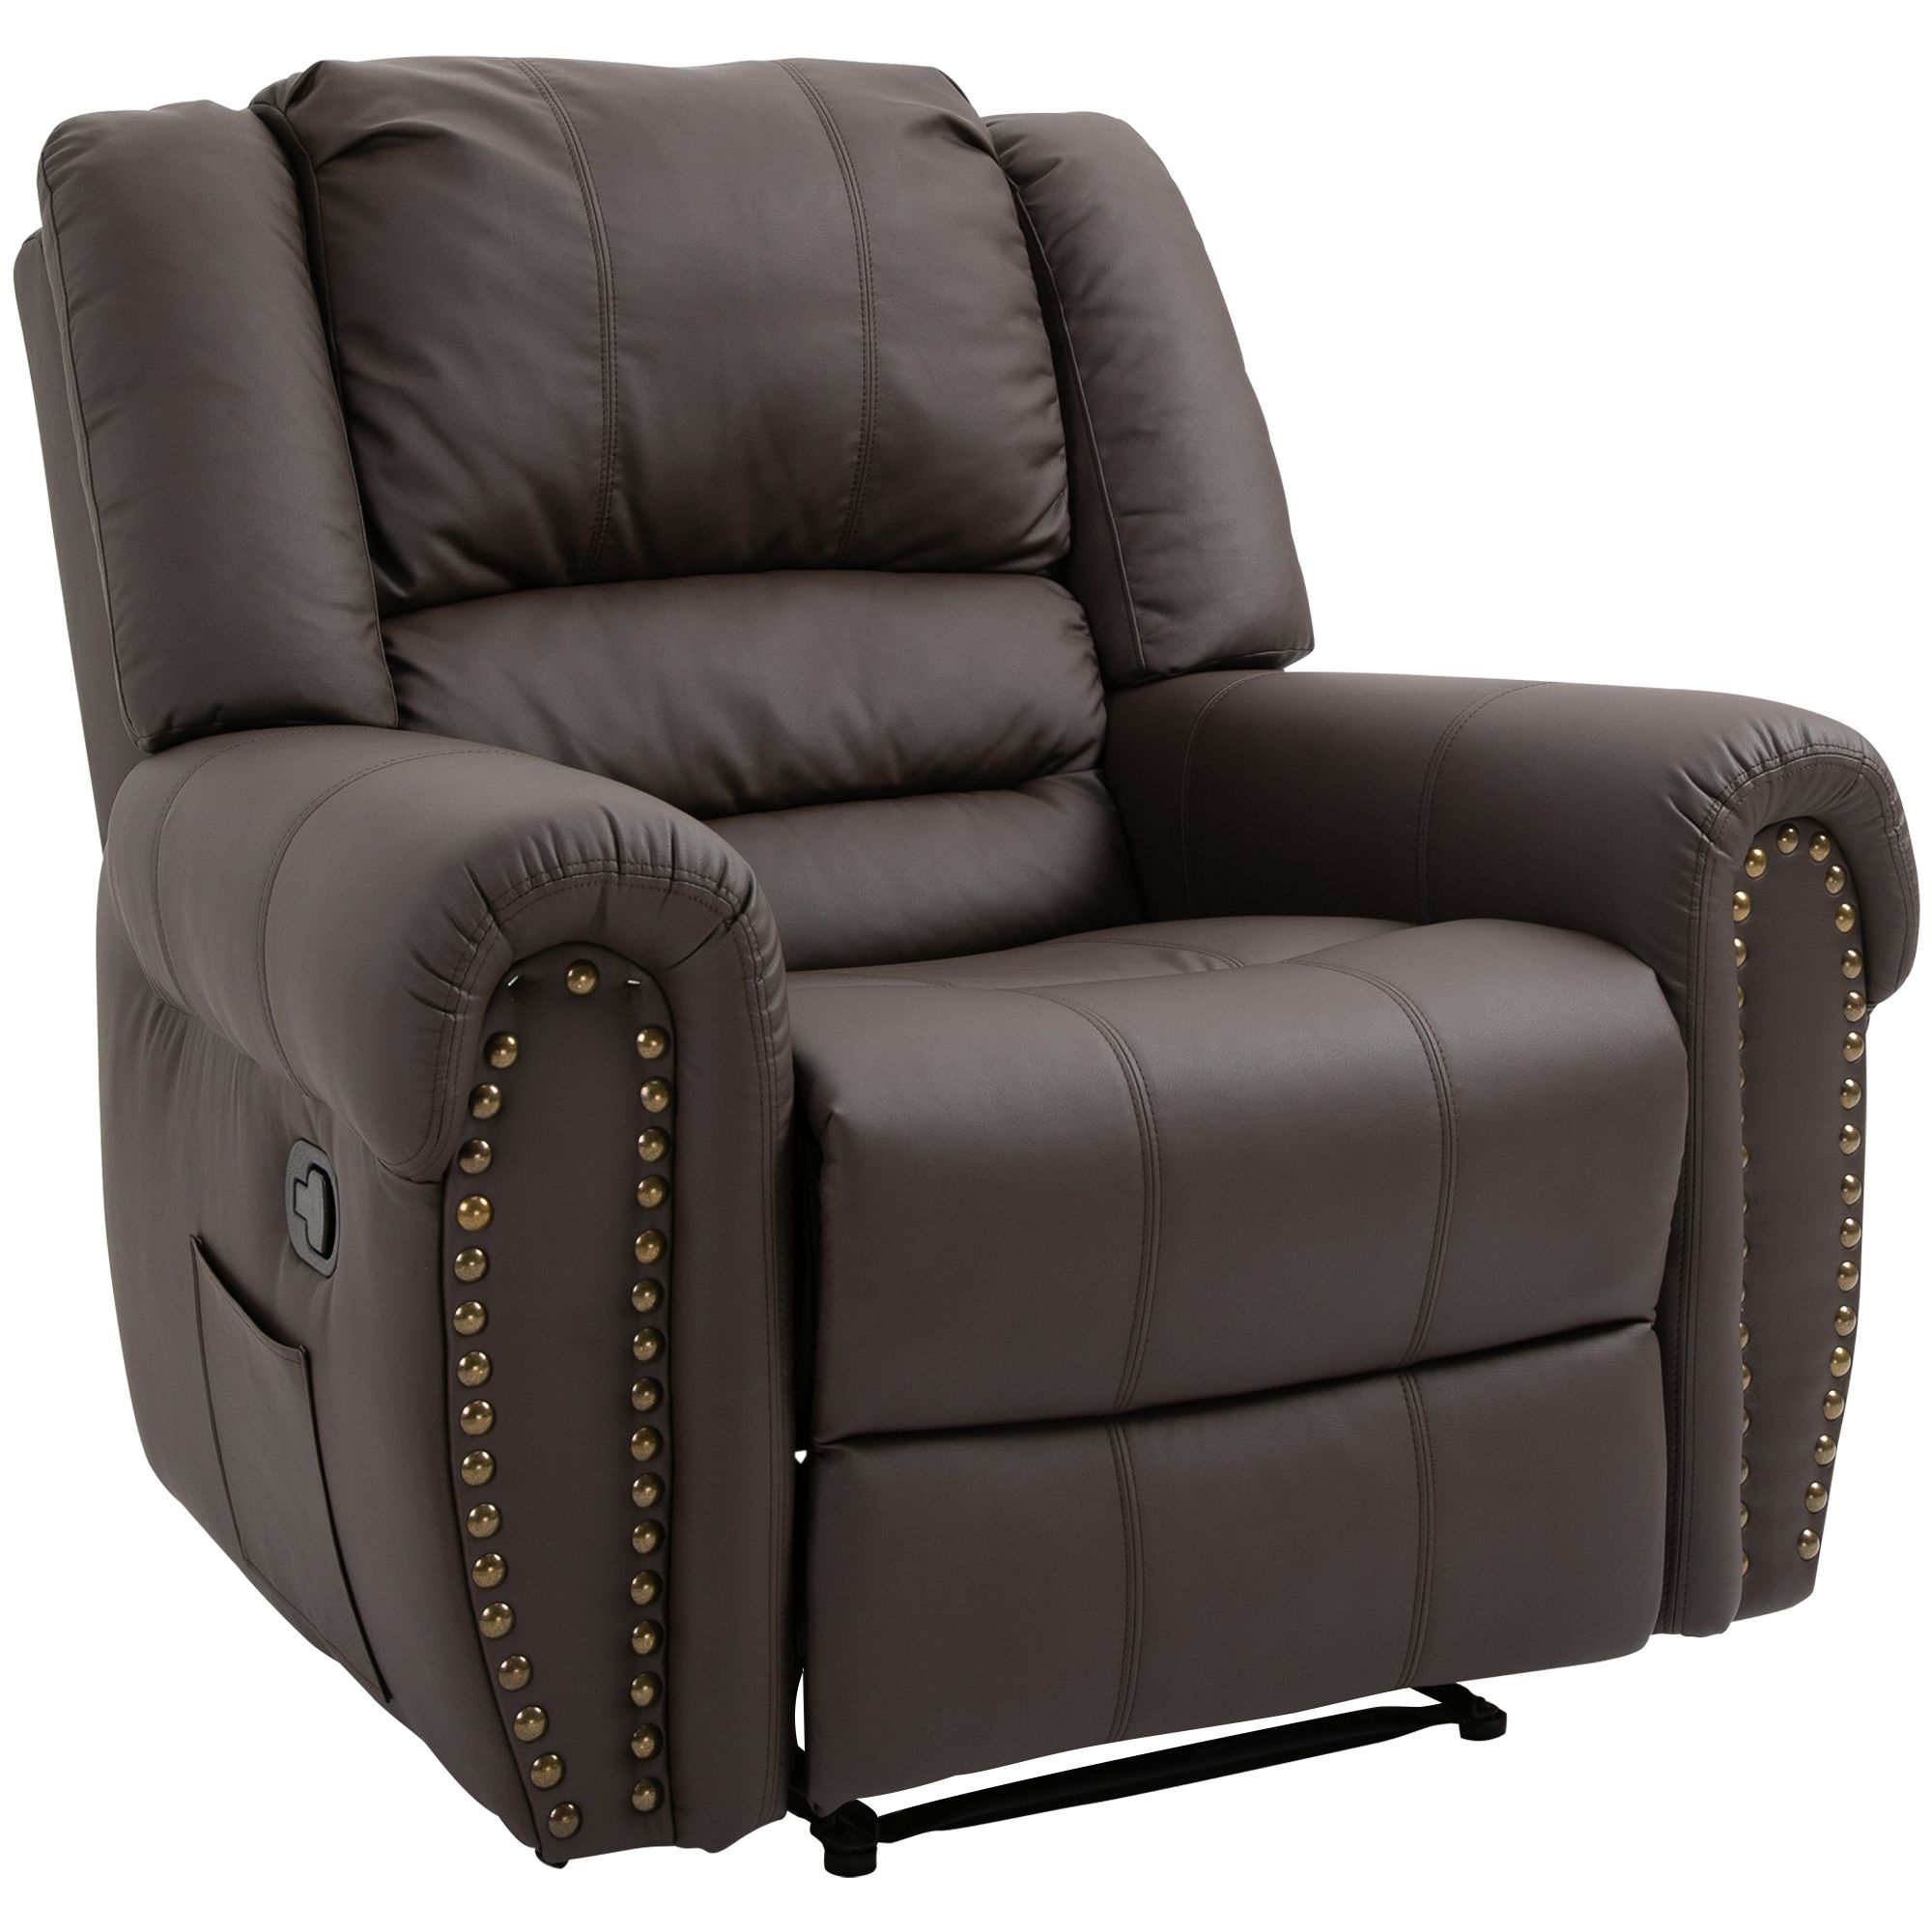 Homcom Manual Recliner Sofa With Footrest Armchair Cushion Pertaining To Manual Reclining Sofas (View 9 of 15)